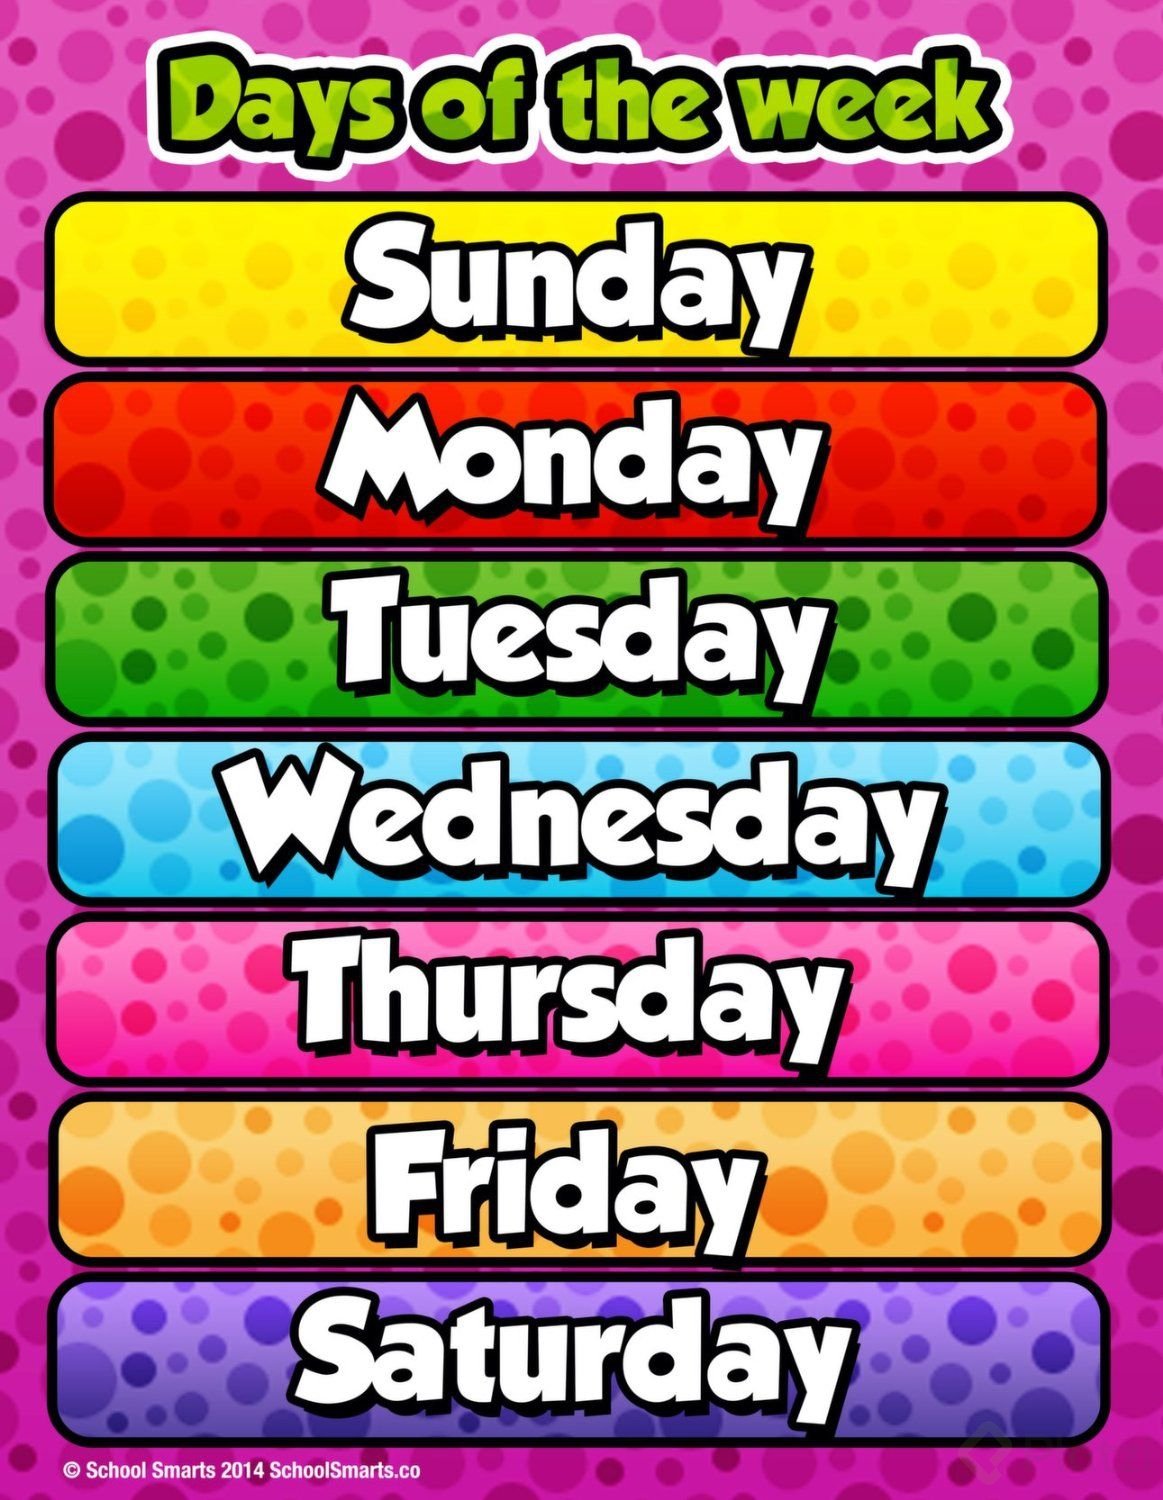 Days of the Week Chart for Classroom Wall or Home - 17_ x 22_ Preschool Learning Poster - Fully Laminated Durable Material by School Smarts.jpg